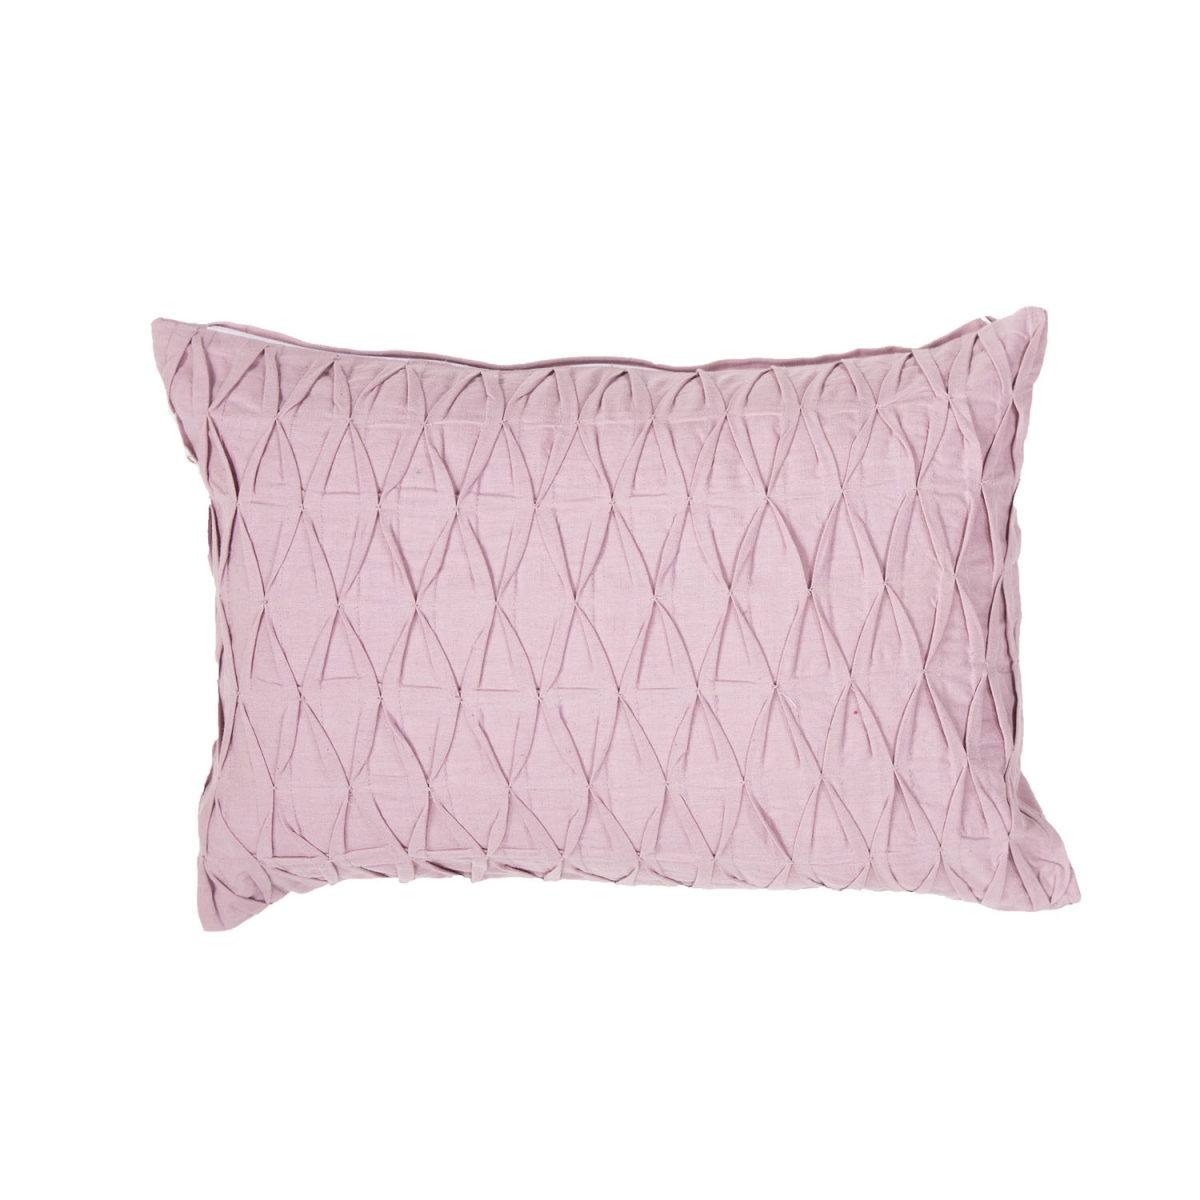 Plw102190 14 X 20 In. Petal Sonali Pink Solid Poly Throw Pillow